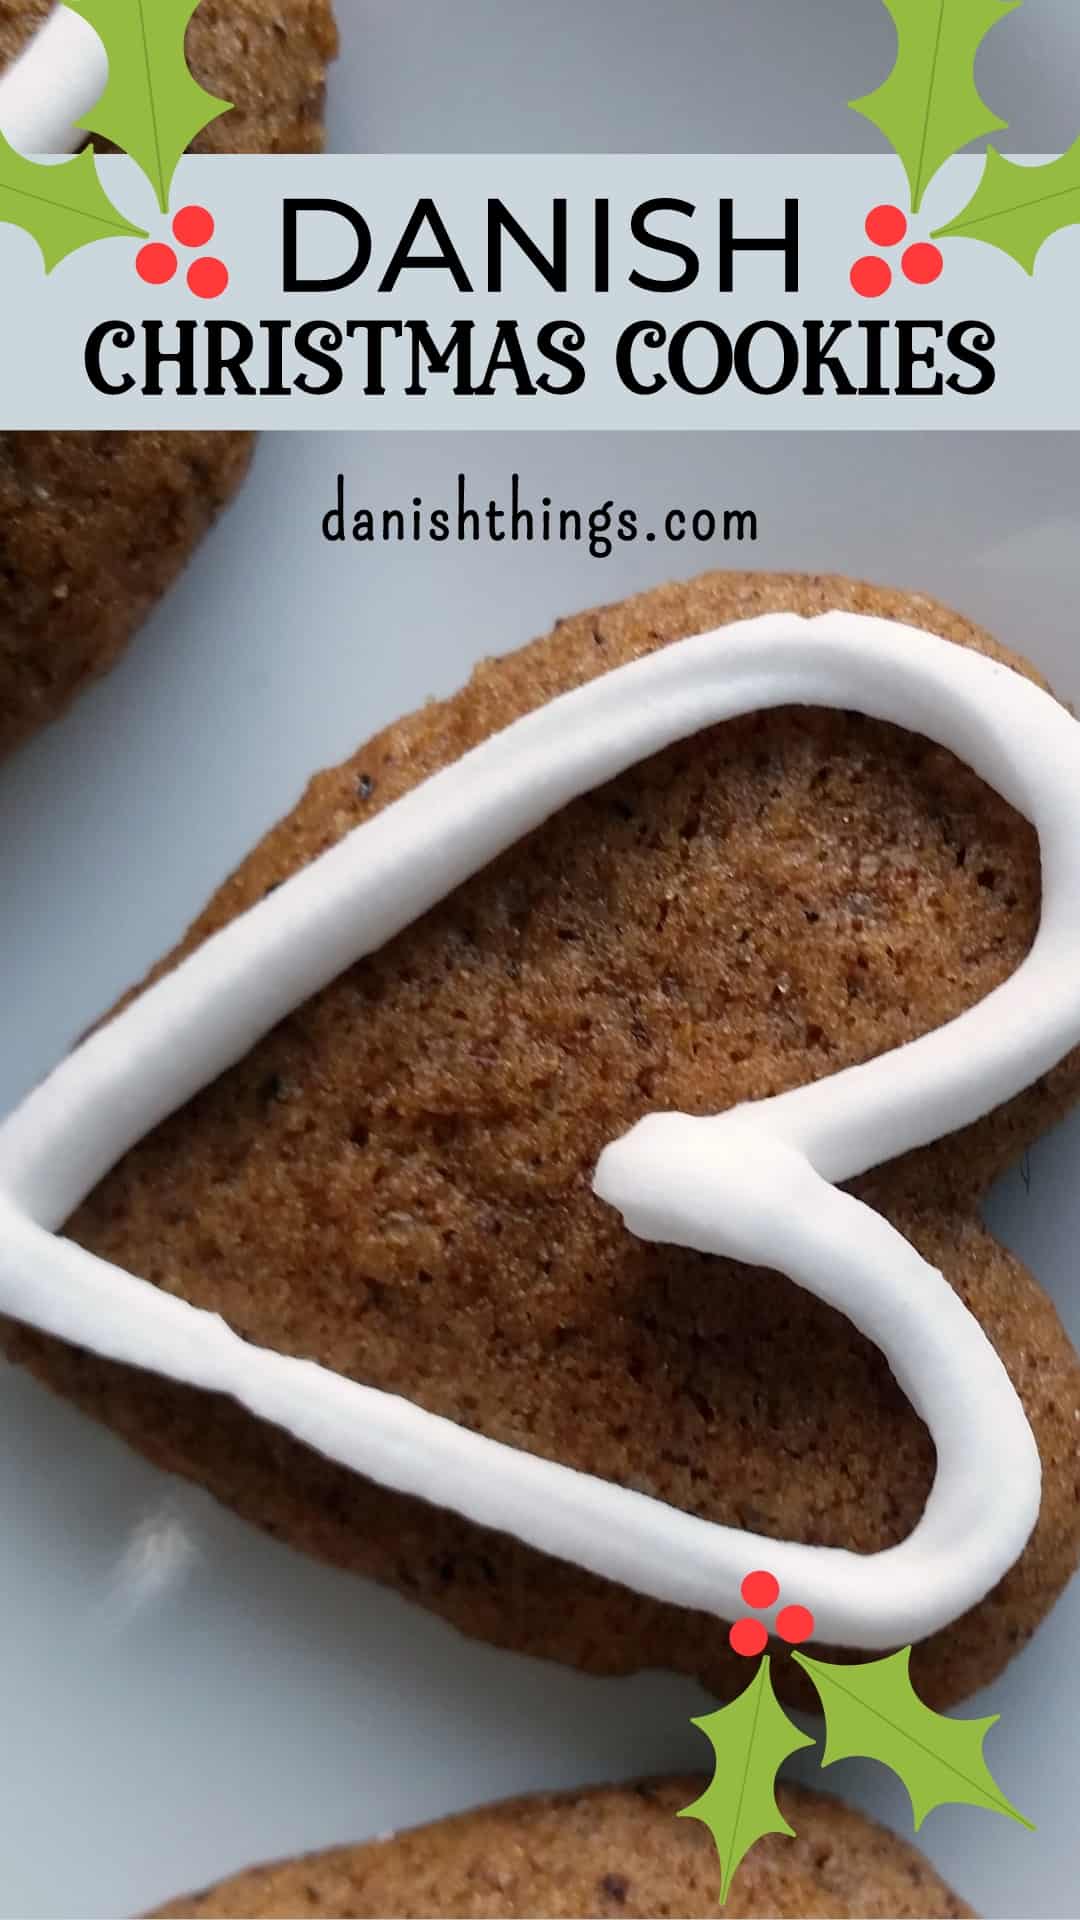 Danish Christmas cookie - honey cake  - takes 2 days.  In Danish, we call the cookies "honningkager," which translates to "honey cakes," but really, they are "honey cookies". You’ll get the recipe and the spice mix @ danishthings.com © Christel Parby - Danish Things #DanishThings #honningkage #honeycake #honeycookie #ChristmasCookie #Danish #Christmas #honey #cookie #cookies